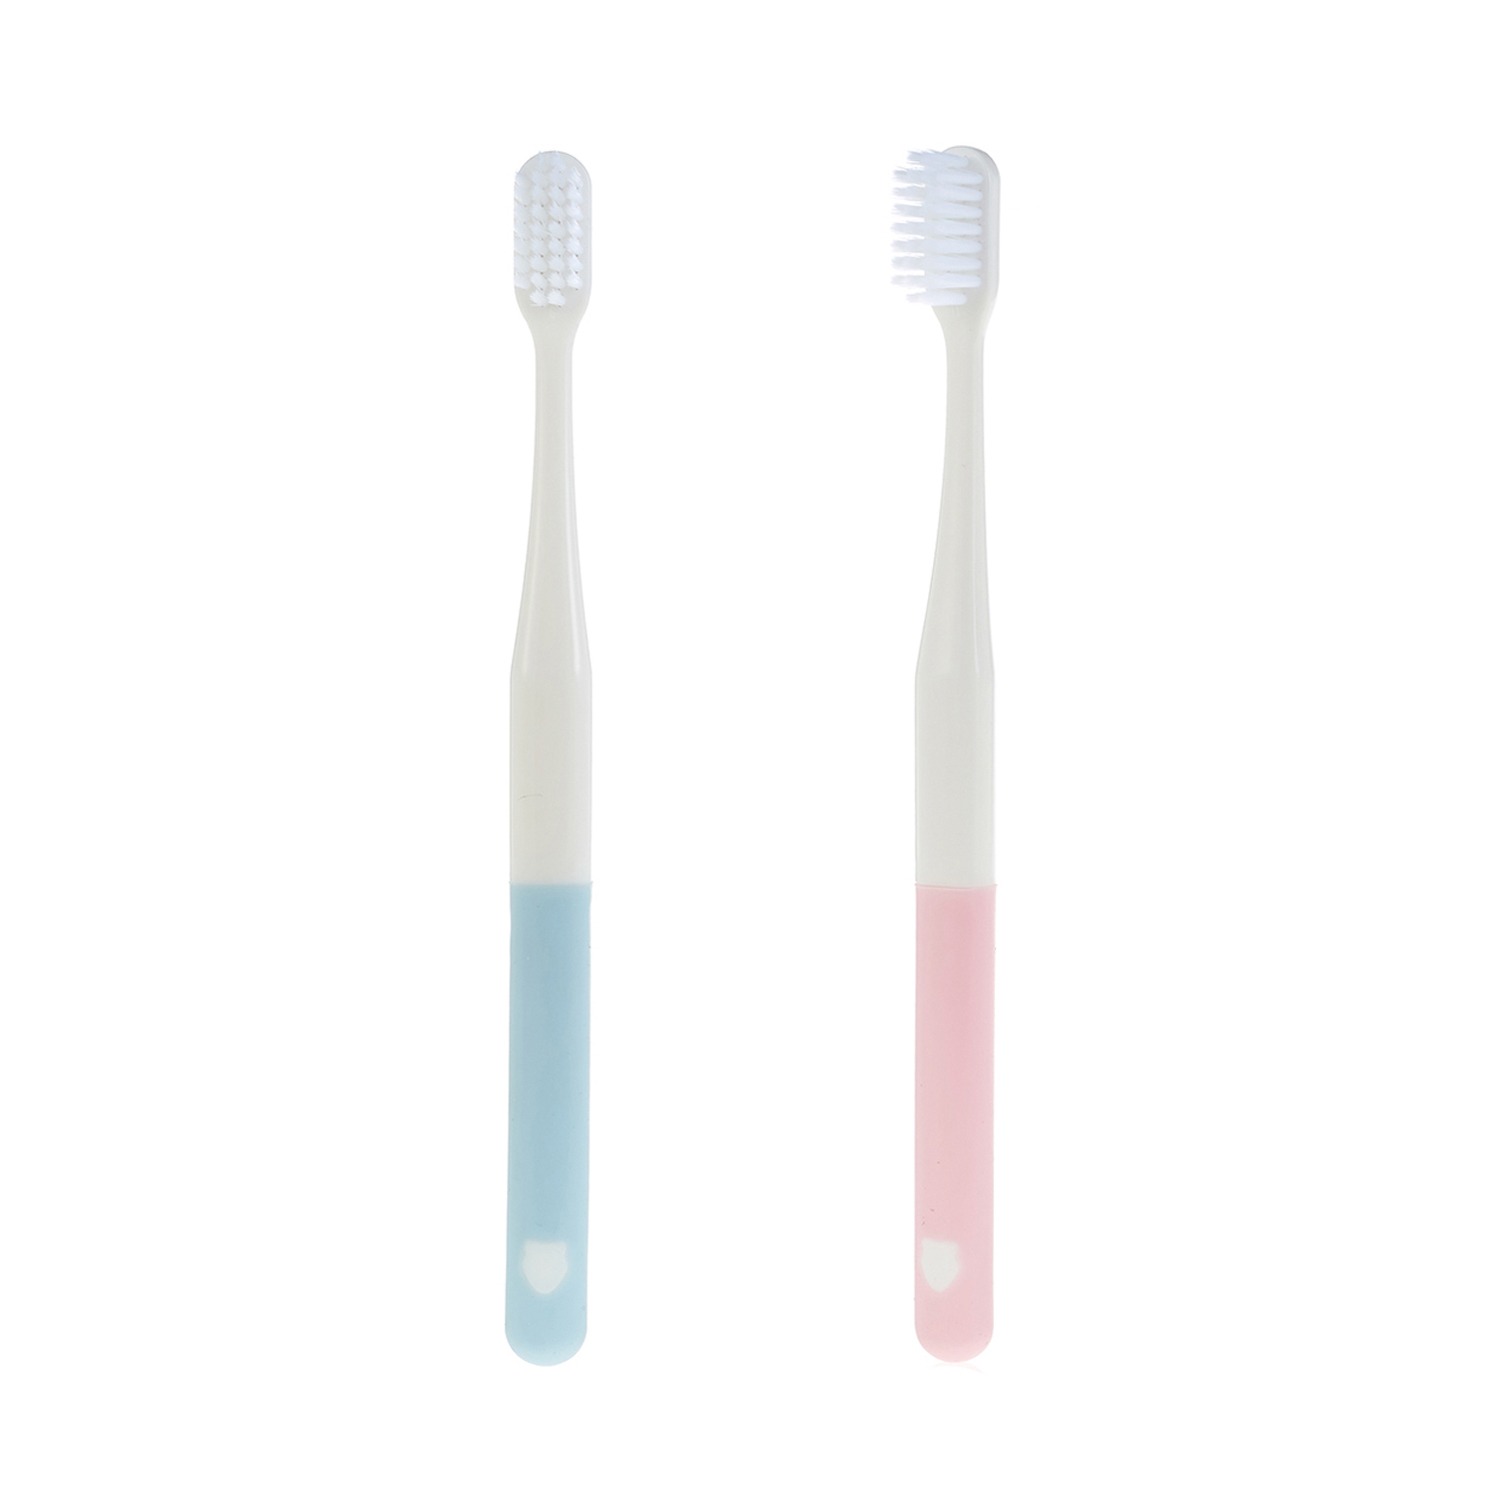 Adult toothbrush L608